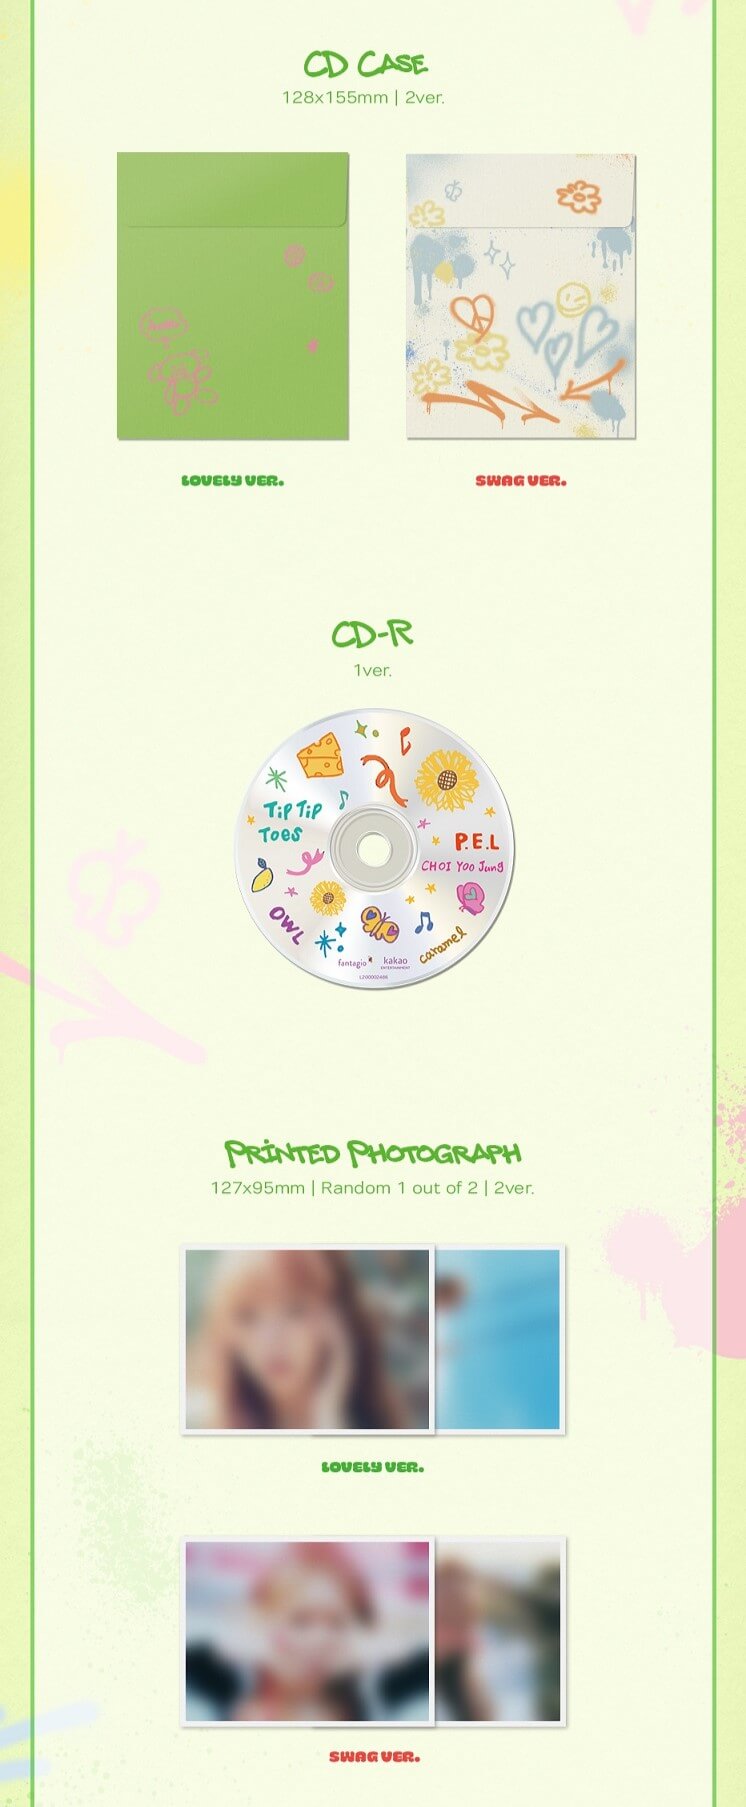 Choi Yoojung Sunflower Lovely + Swag Version Inclusions CD Case CD Printed Photograph